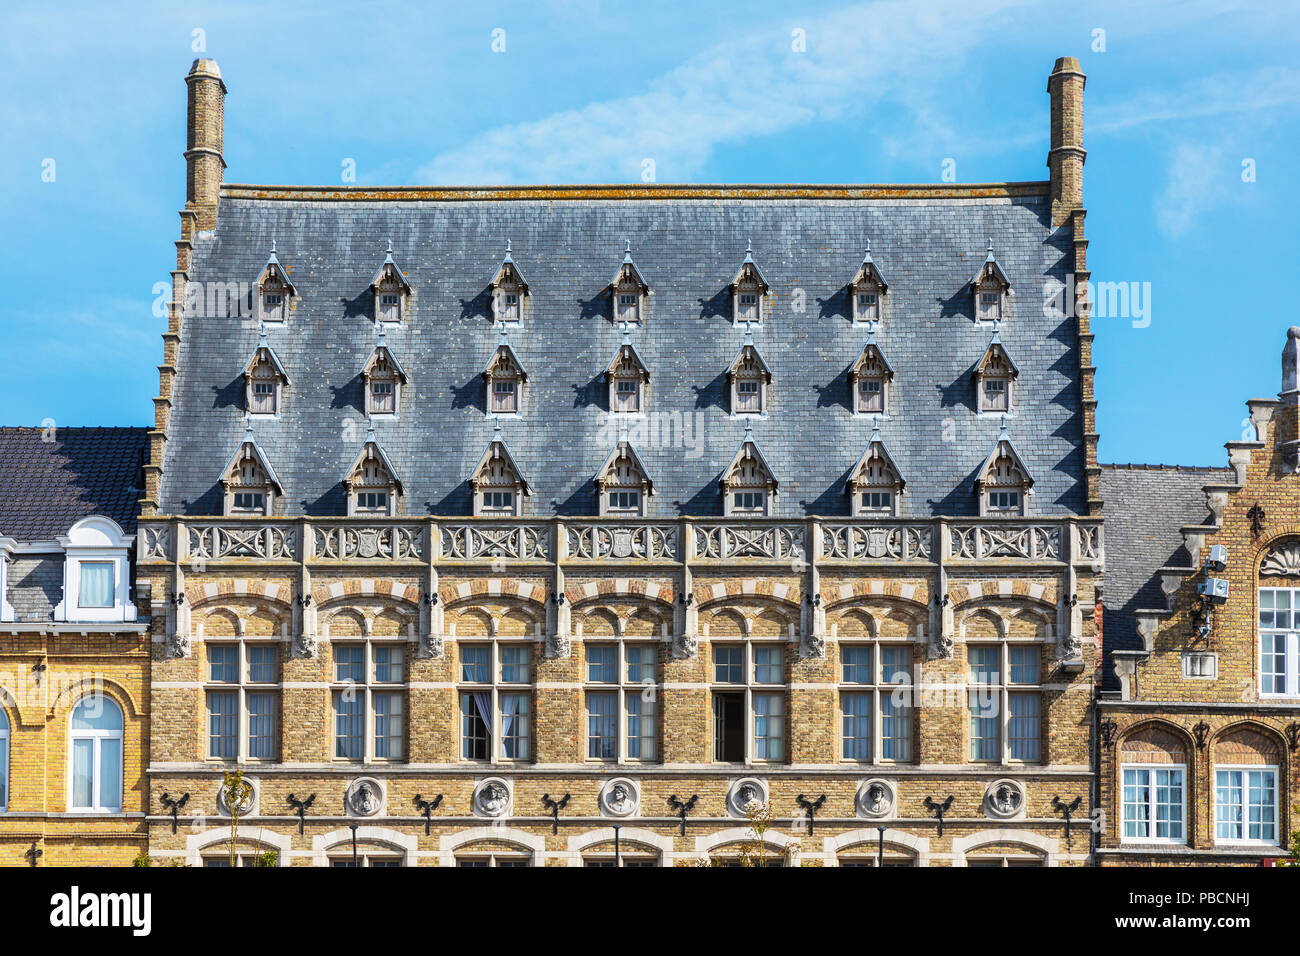 Flemish architecture with attic windows and ornate arches in the Old Seignory building, Grote Markt, Ypres, Belgium Stock Photo